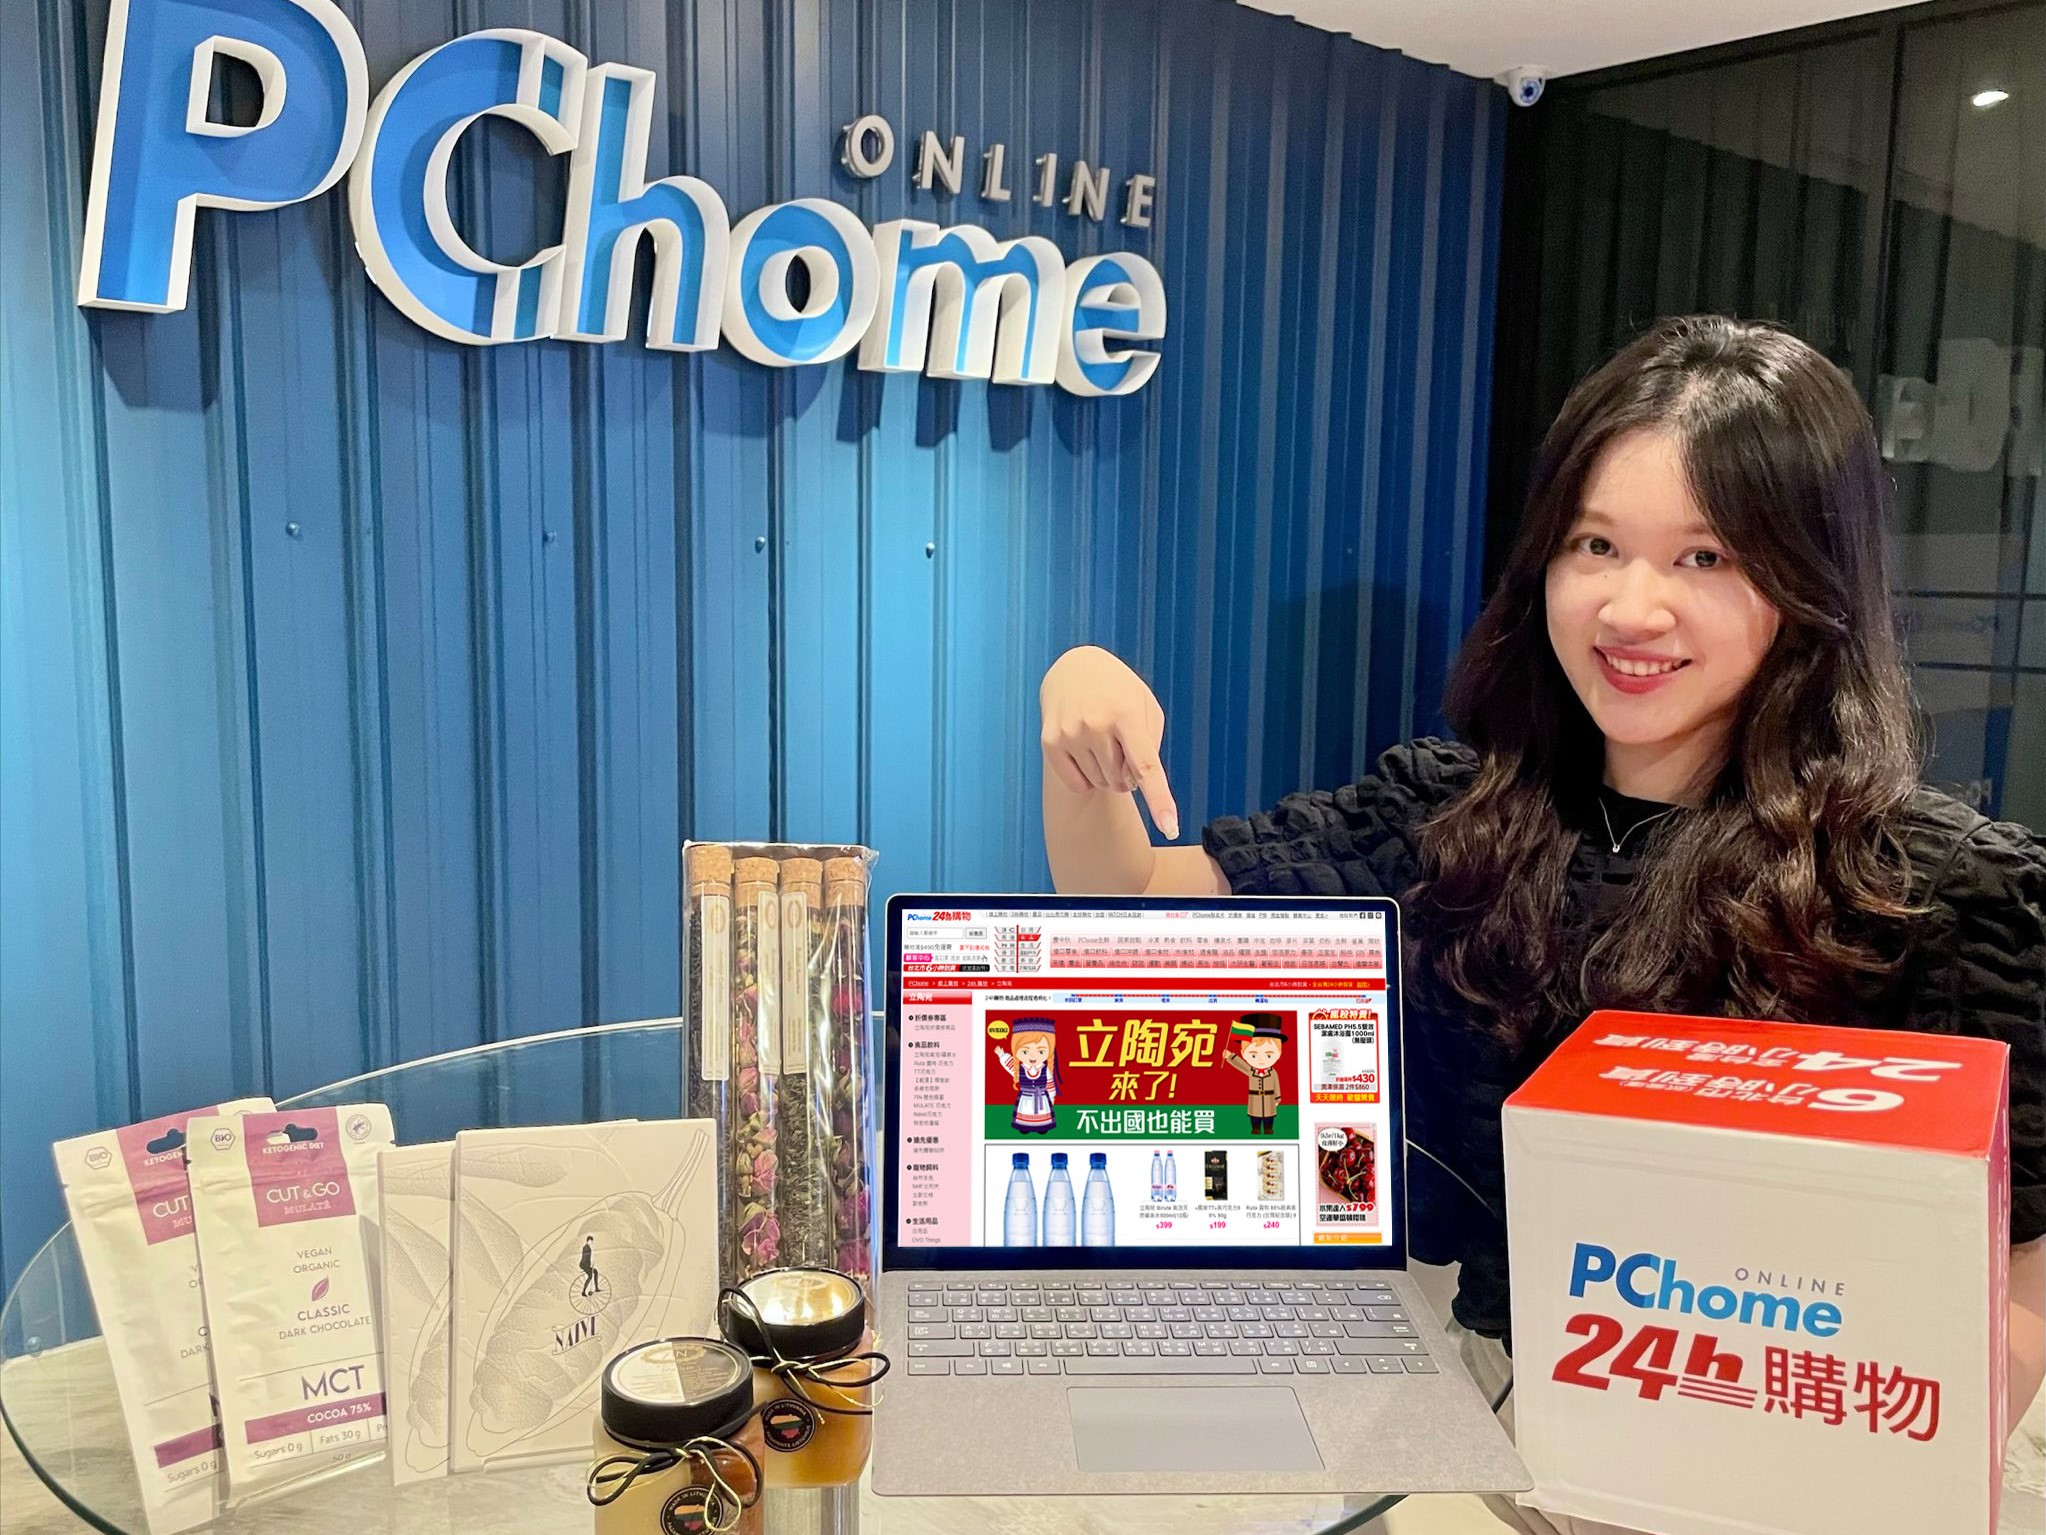 The Only E-Commerce in Taiwan! PChome 24h Shopping Joins Hands with the Lithuanian Enterprise to Officially Open the Lithuania Pavilion  Special Promotion for 8% off Is Offered for Products of the Lithuania Pavilion. Acquire the Popular Lithuanian Souvenirs Right Now